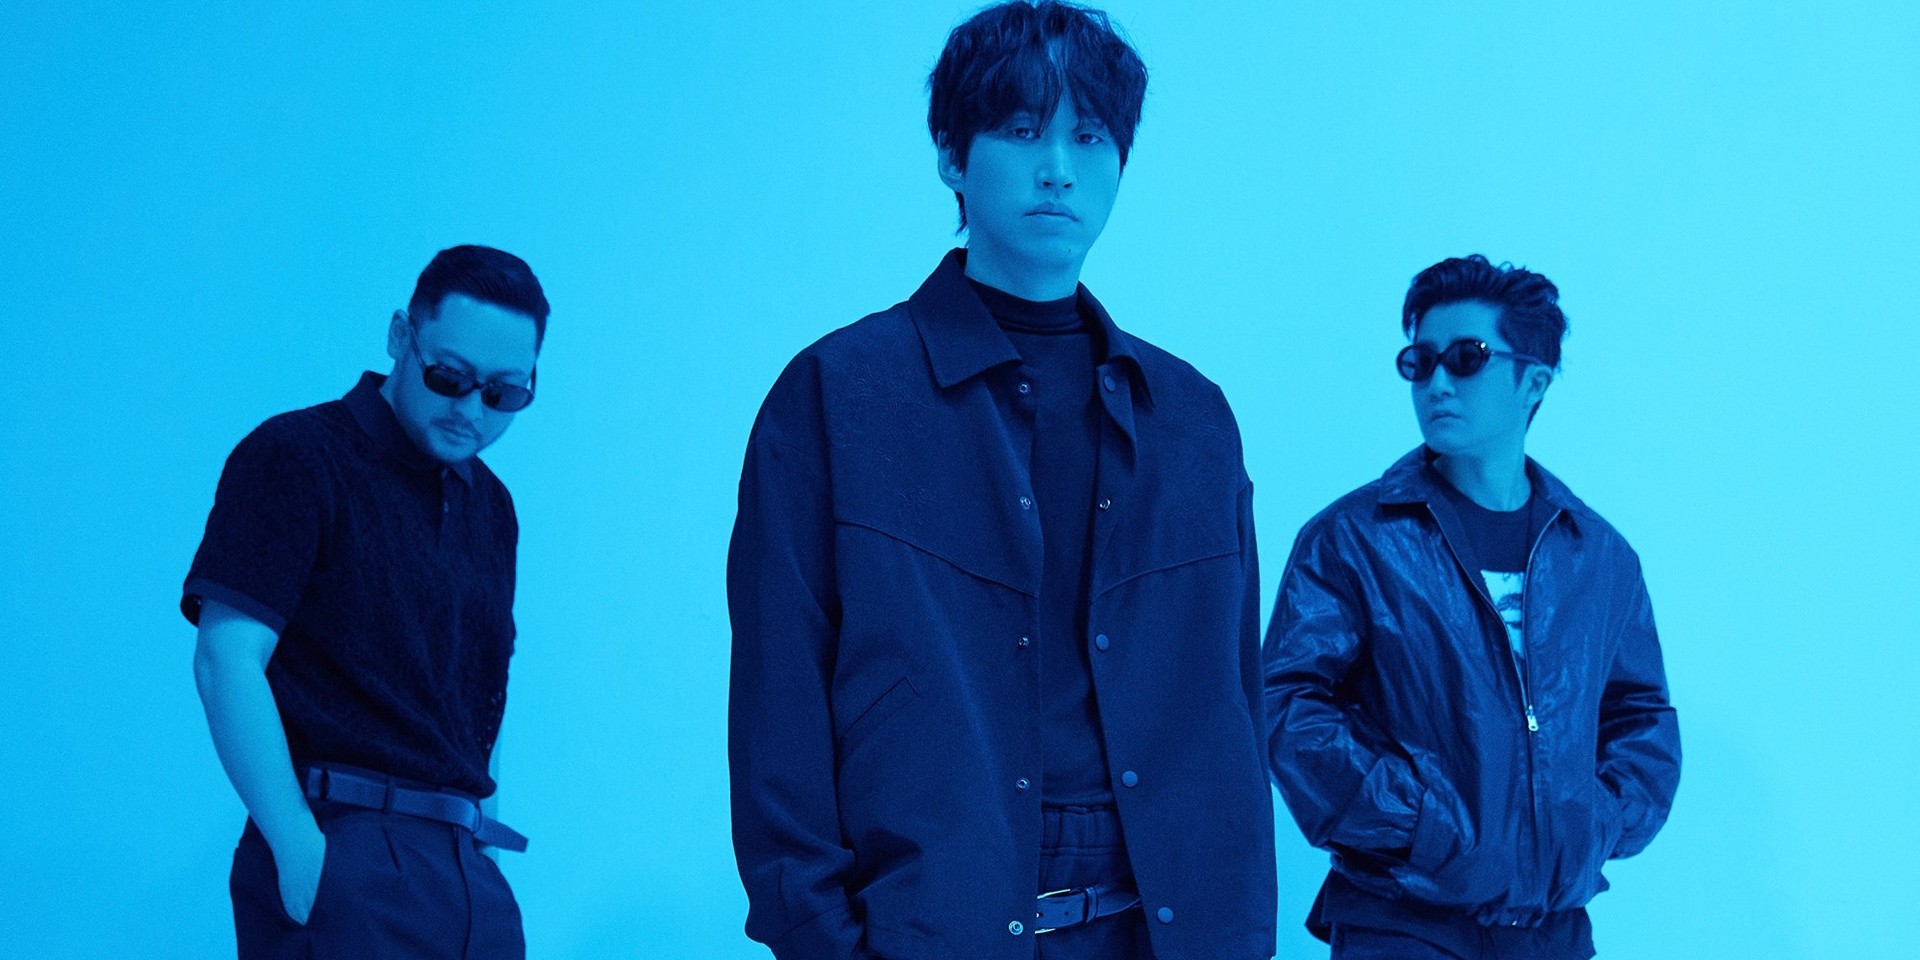 EPIK HIGH announce 2023 All Time High Tour in North America and Europe – concerts in London, Munich, San Diego, New York, Toronto, Las Vegas, and more confirmed